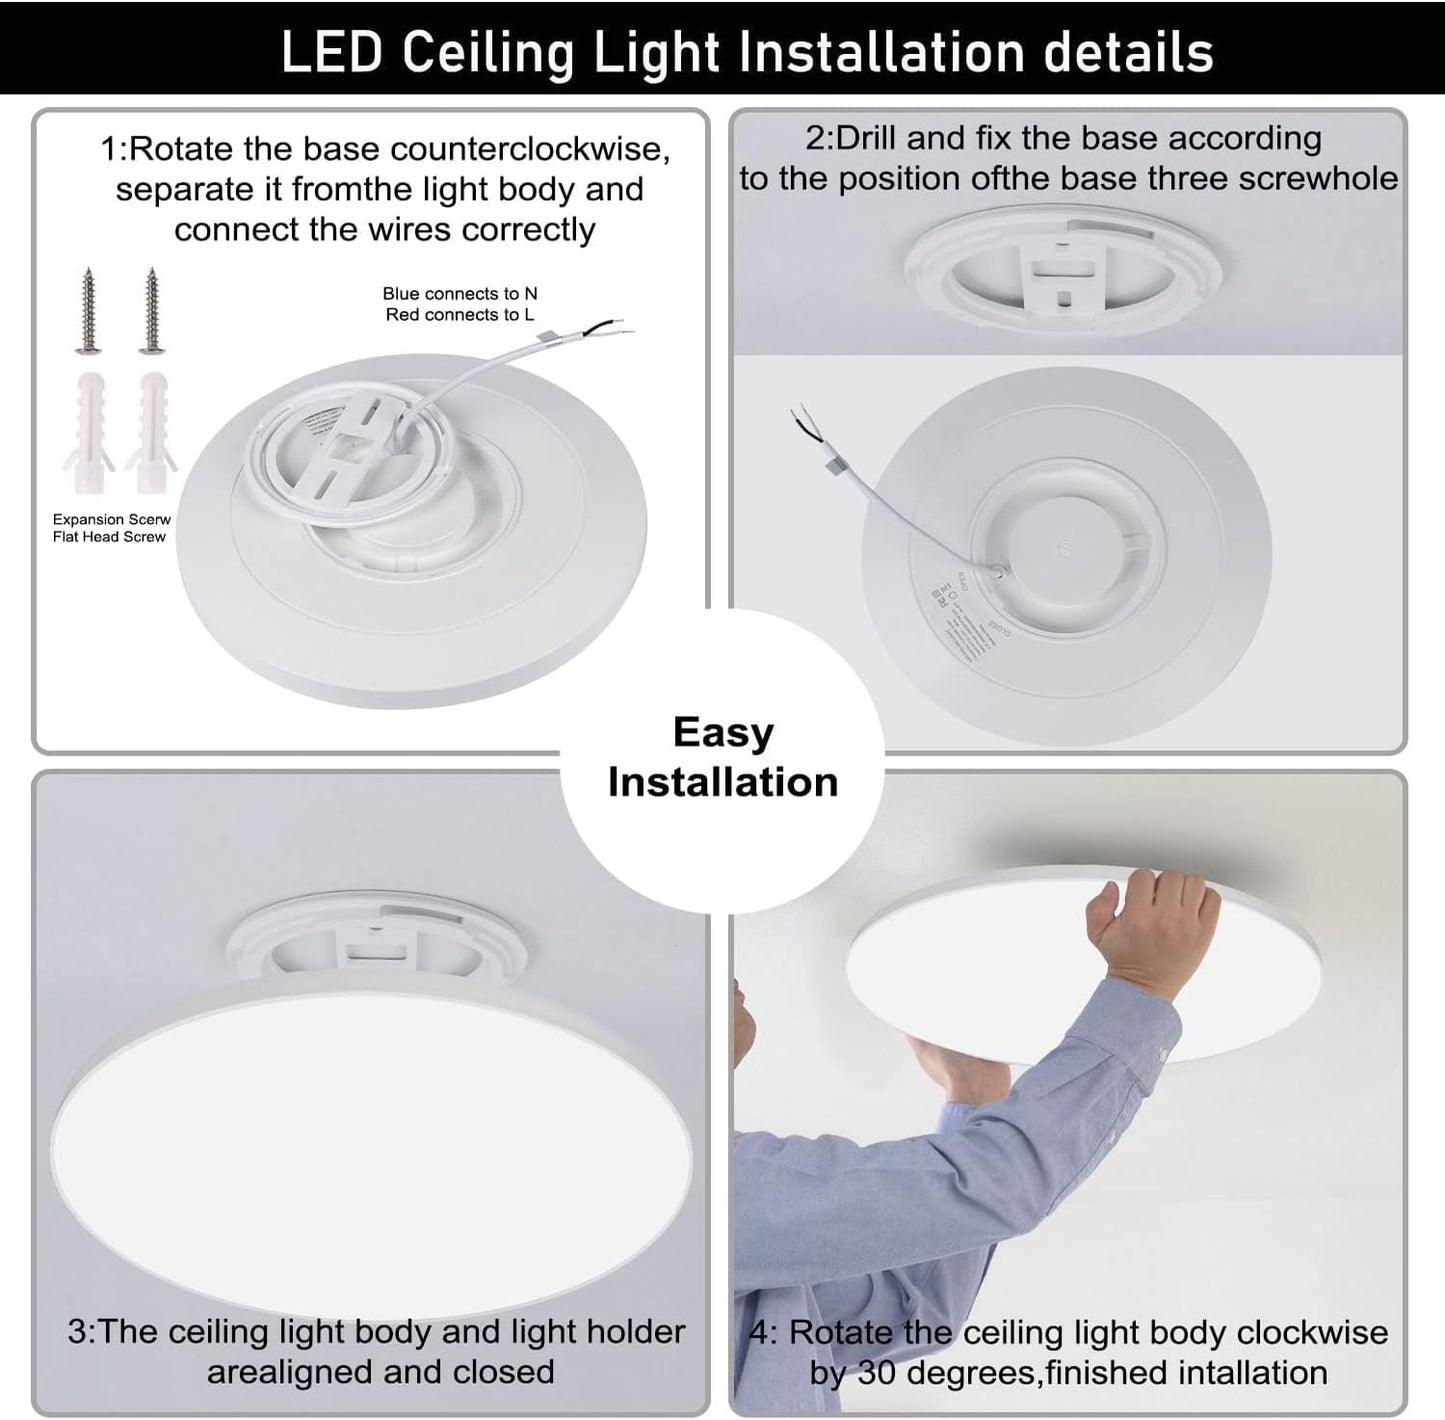 6Pack 2880LM Flush Mount 11inch LED Ceiling Light ,3 Color change 3 in1 (3000k/4000k/6000k)Thin Rimless Ceiling lighting Surface Mount 120V Mosquito Waterproof for Kitchen Bedroom Utility Closet Room